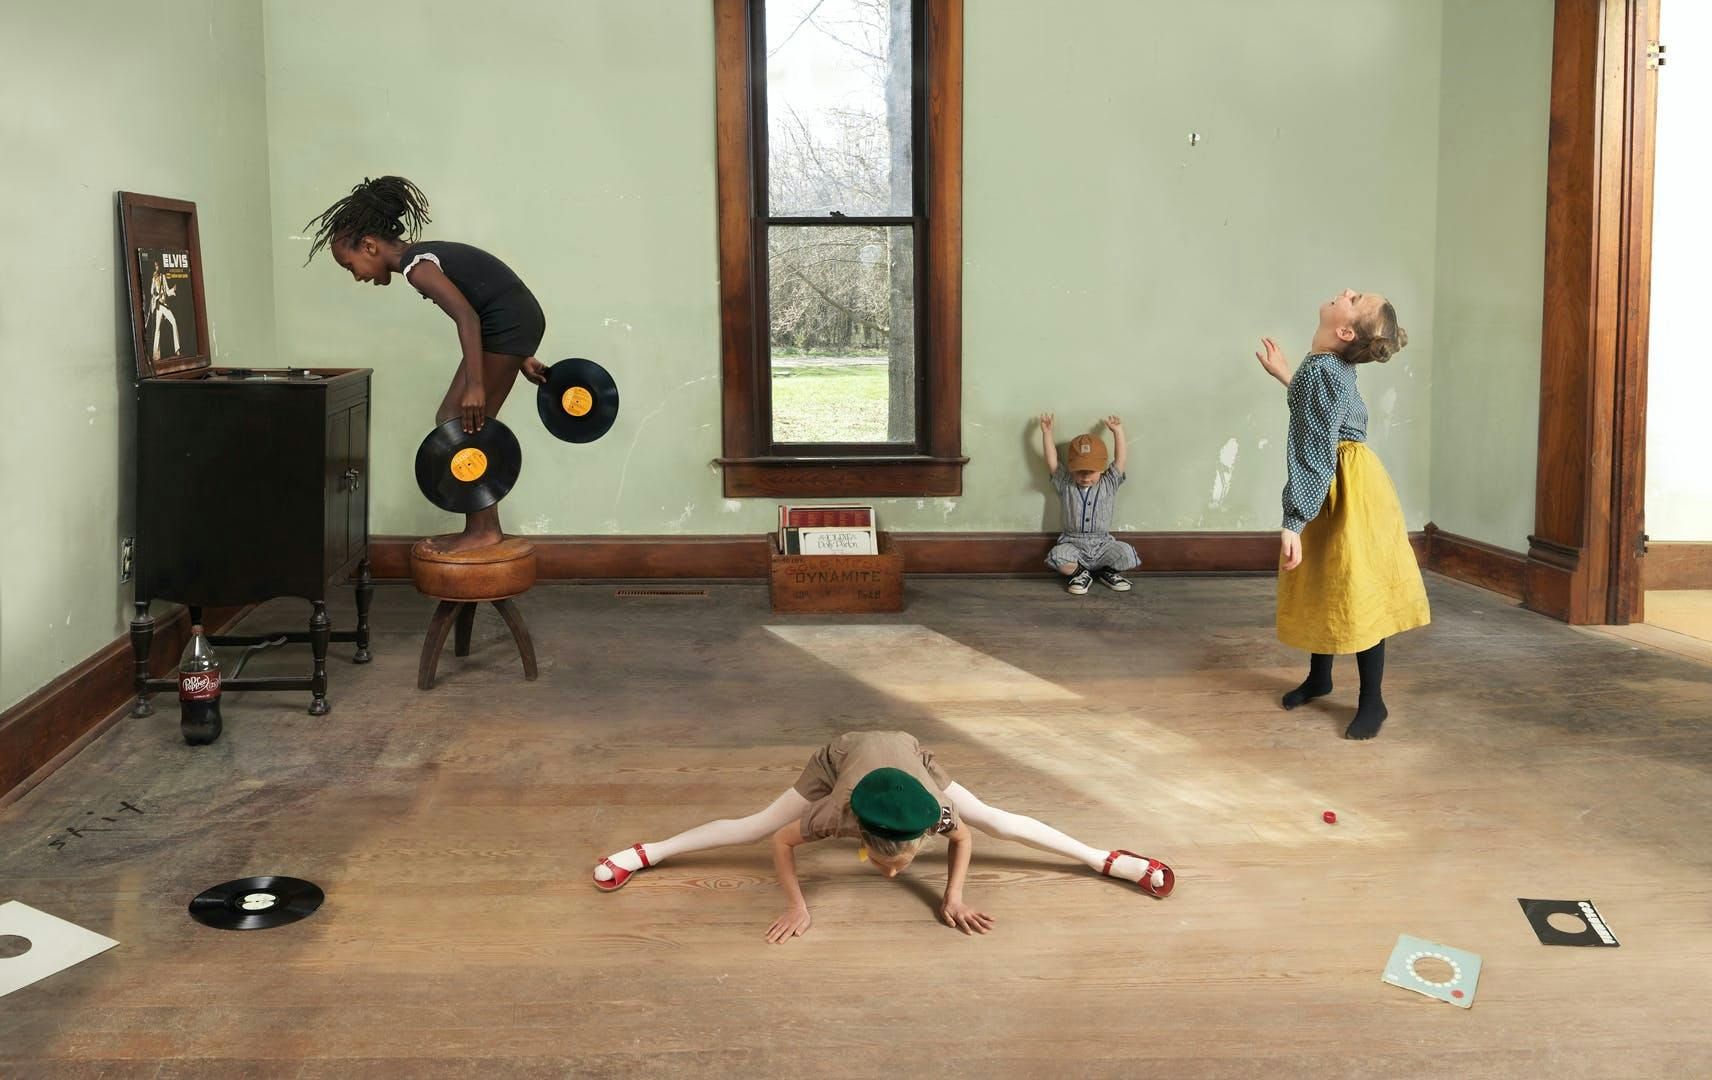 Photograph of children playing with records